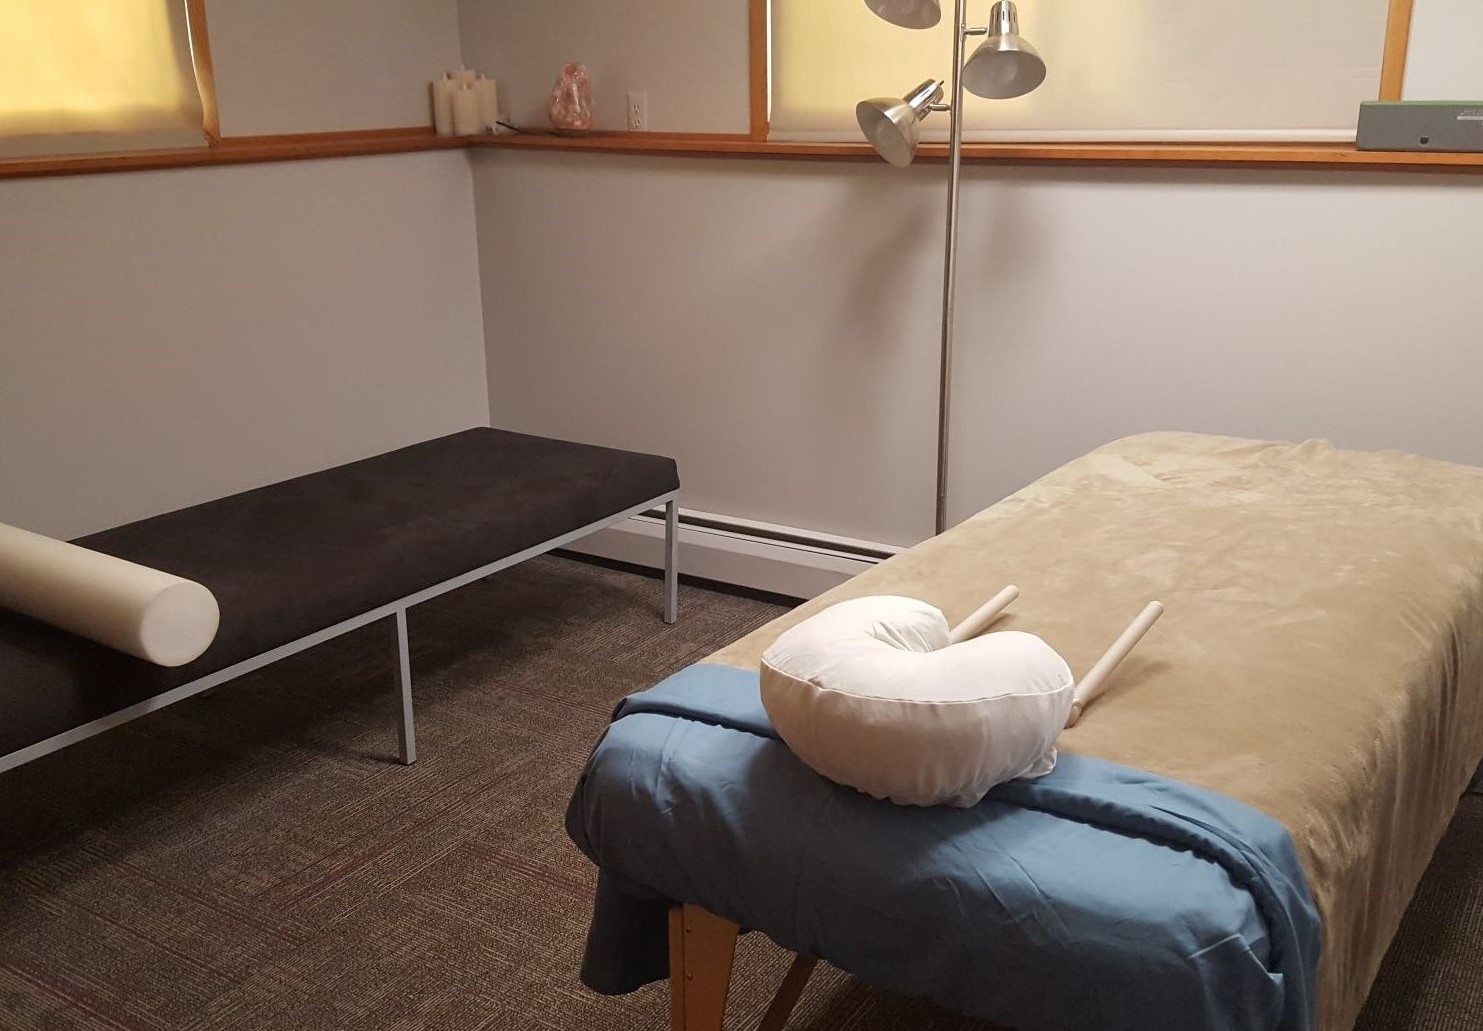 Image of Therapy Room in Virtual Office Tour